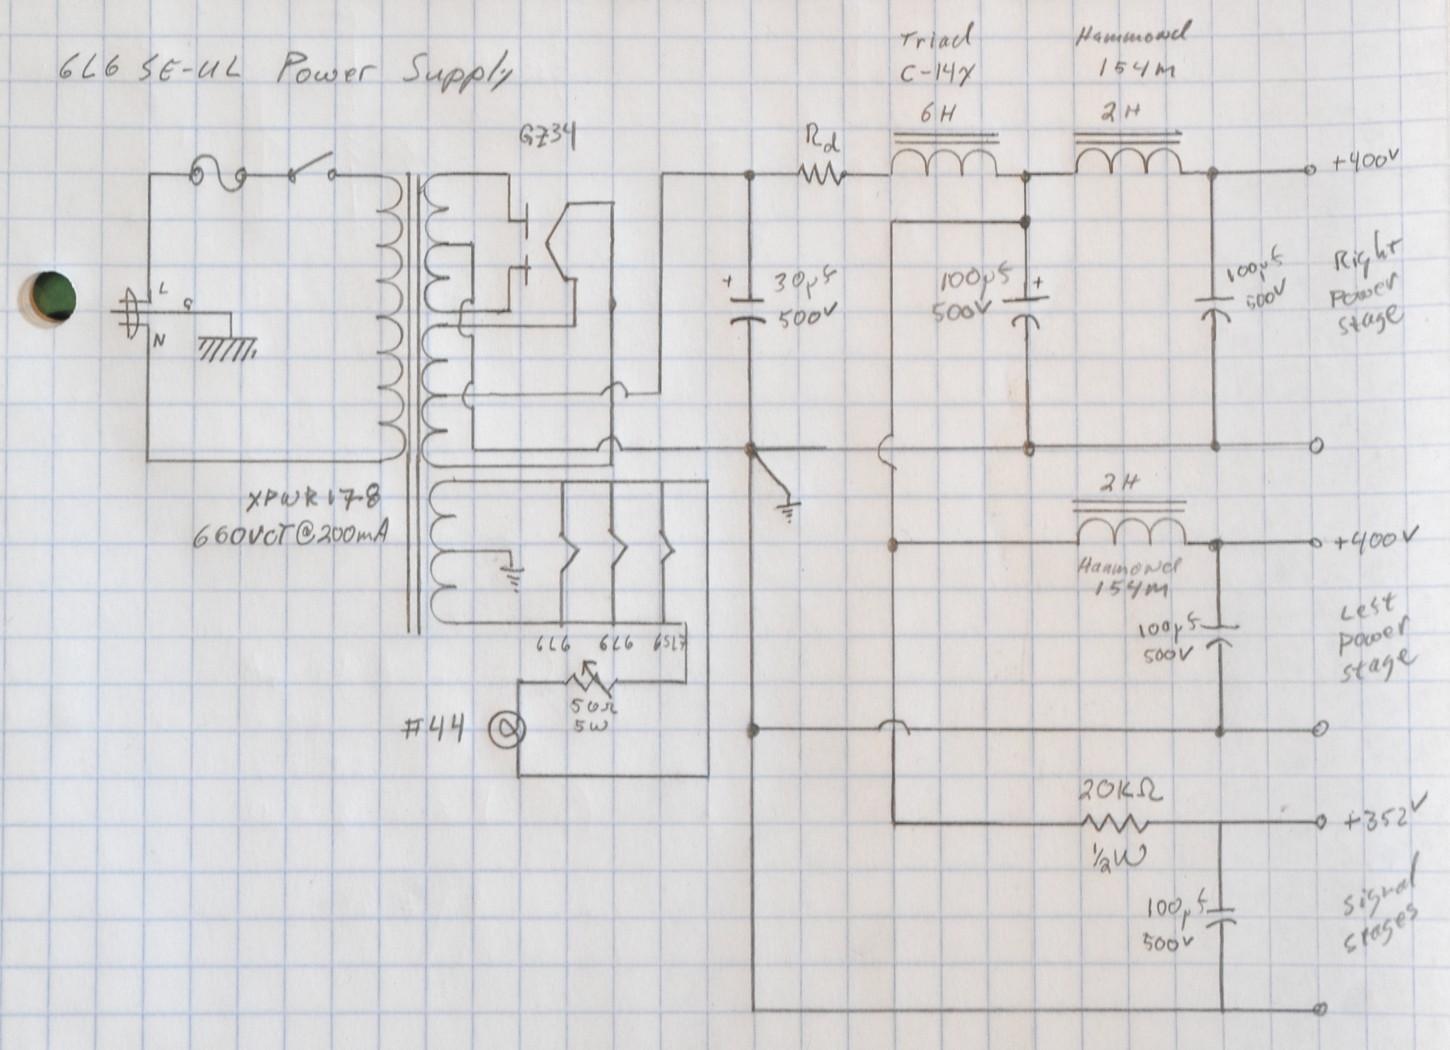 6L6 SE-UL Power Suply Schematic